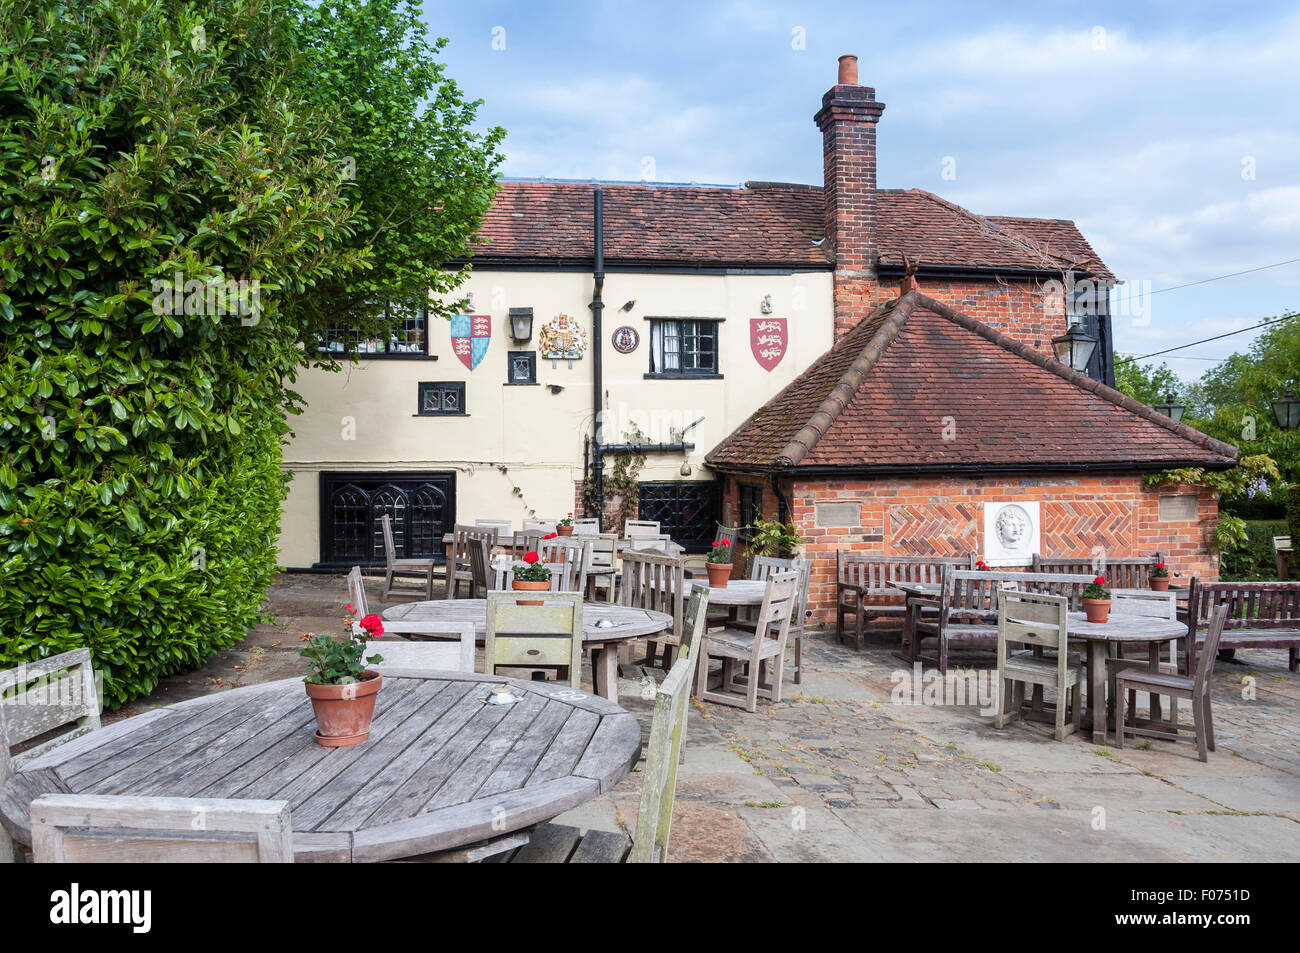 Beer garden at 'The Royal Standard of England' pub, Forty Green, Beaconsfield, Buckinghamshire, England, United Kingdom Stock Photo